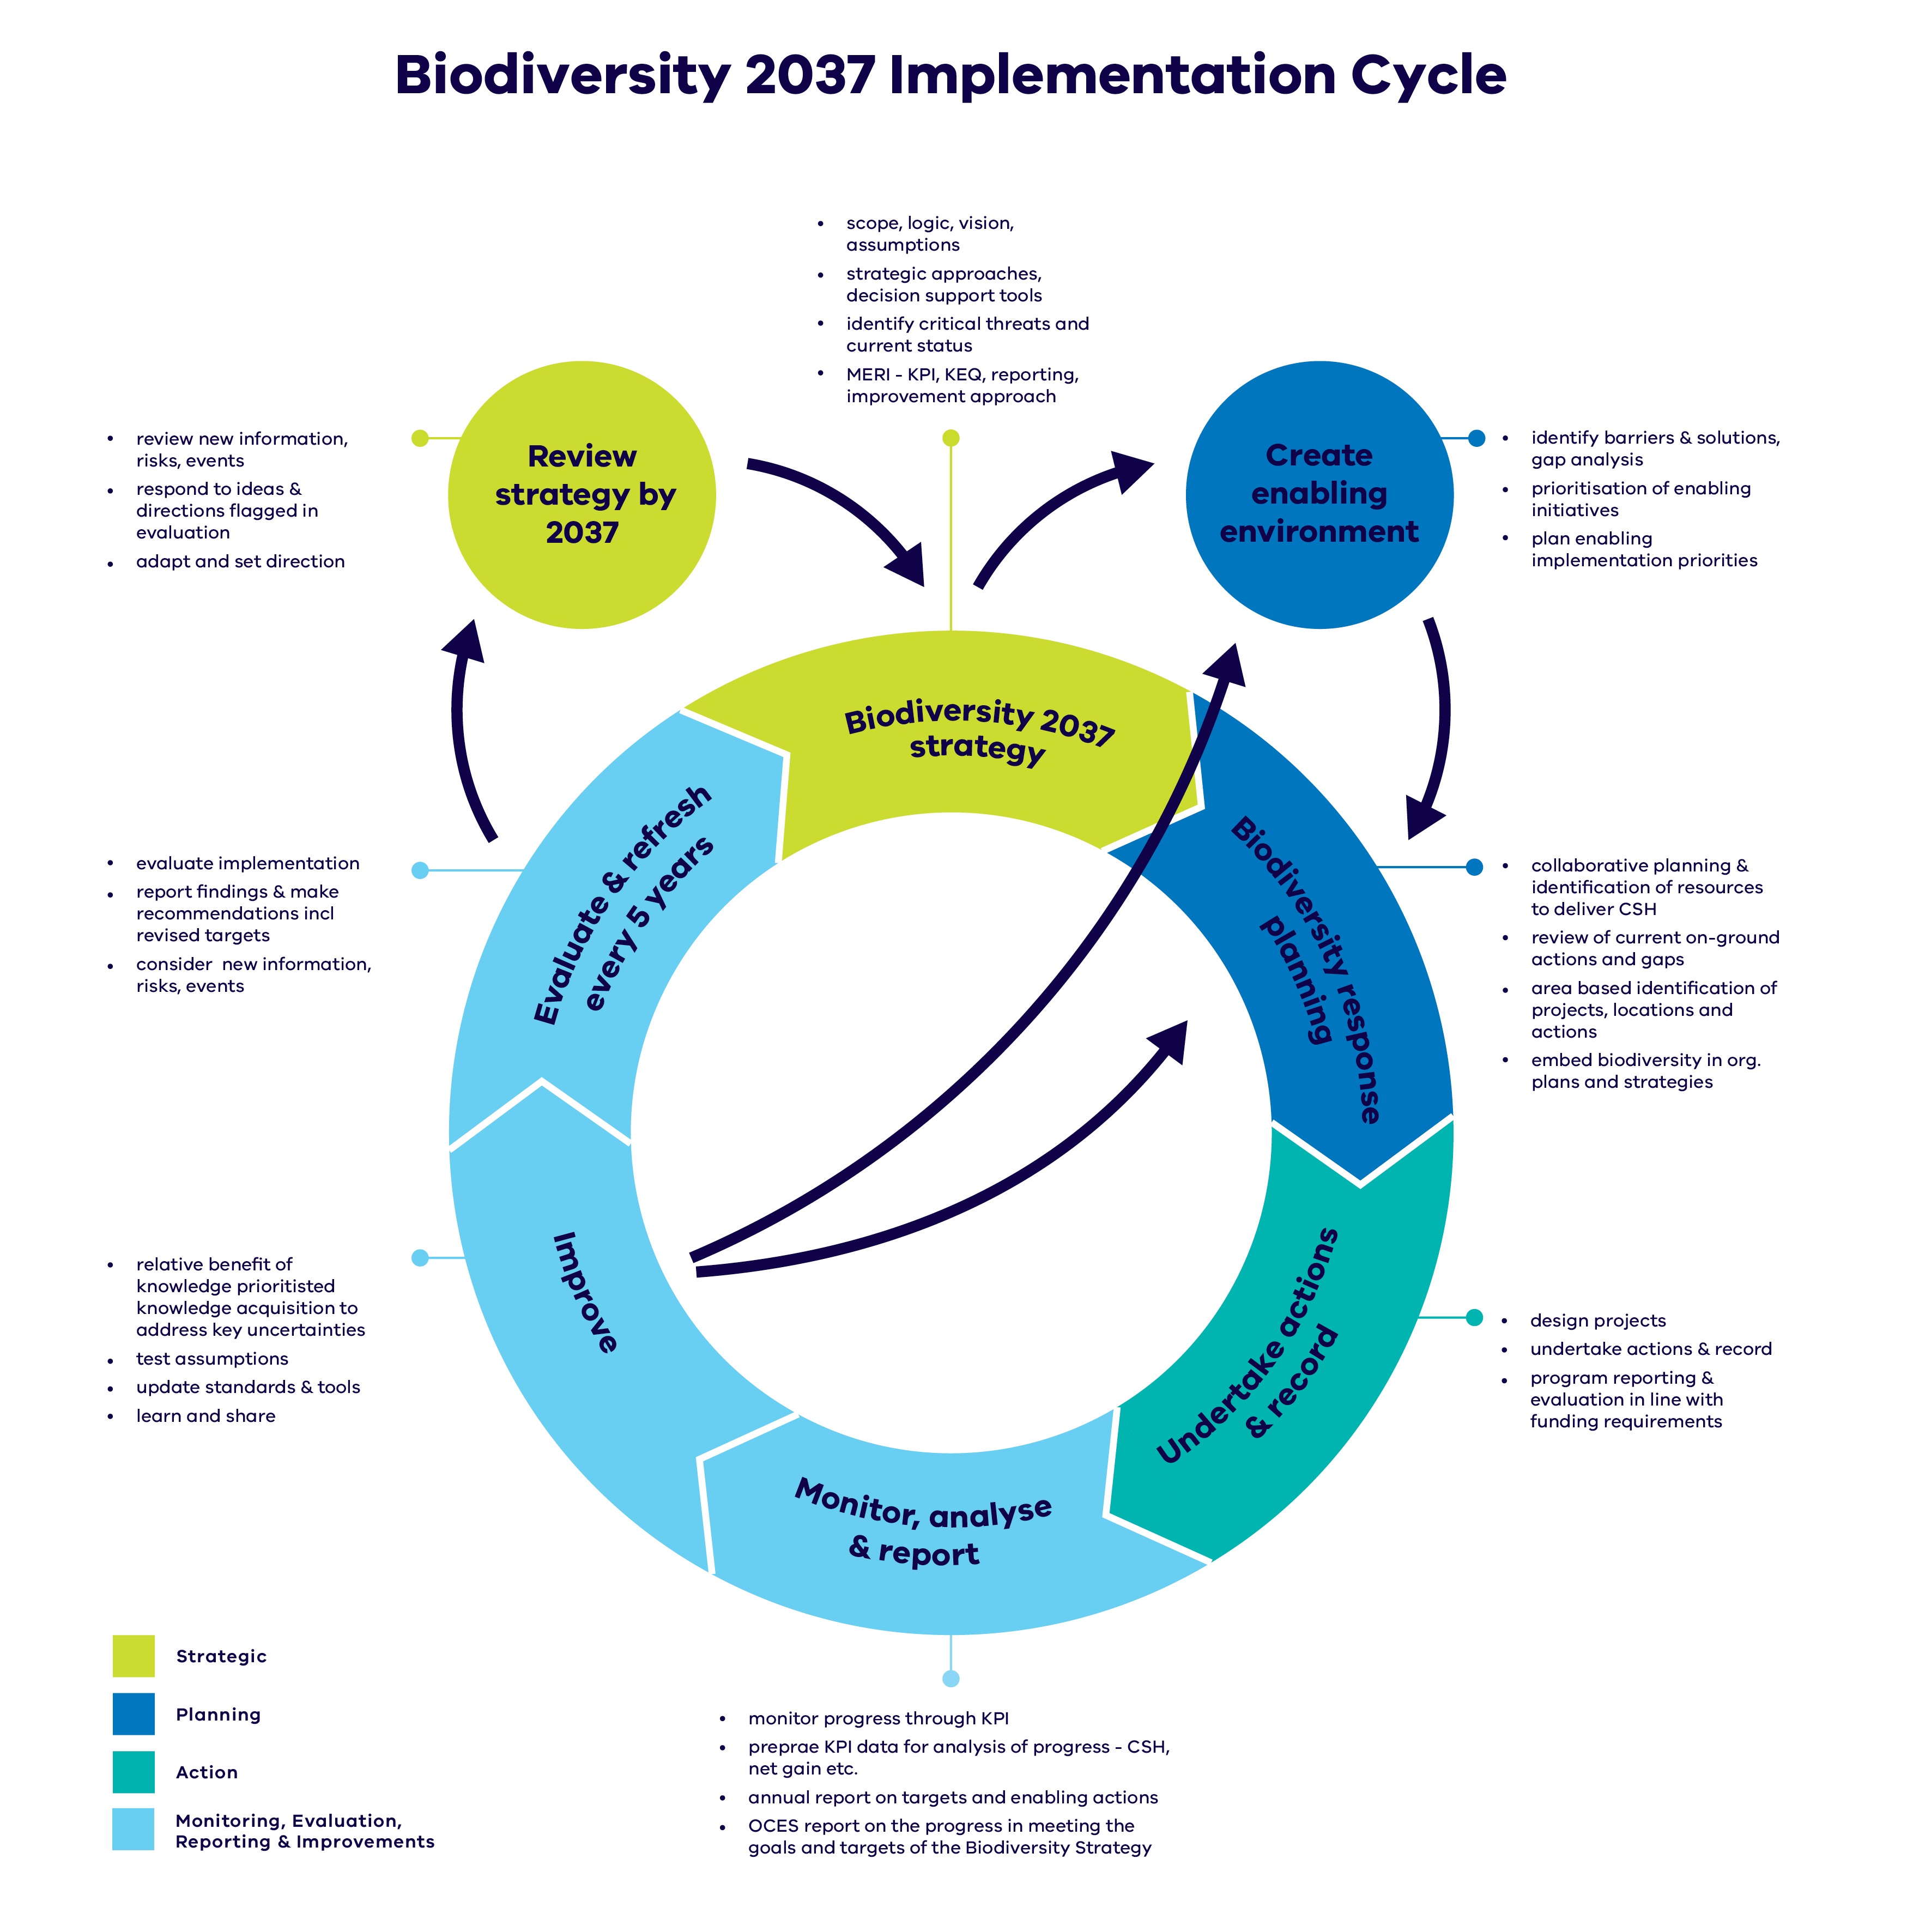 The Biodiversity 2037 Implementation cycle, outlining the steps taken within and across the 20-year timeframe.